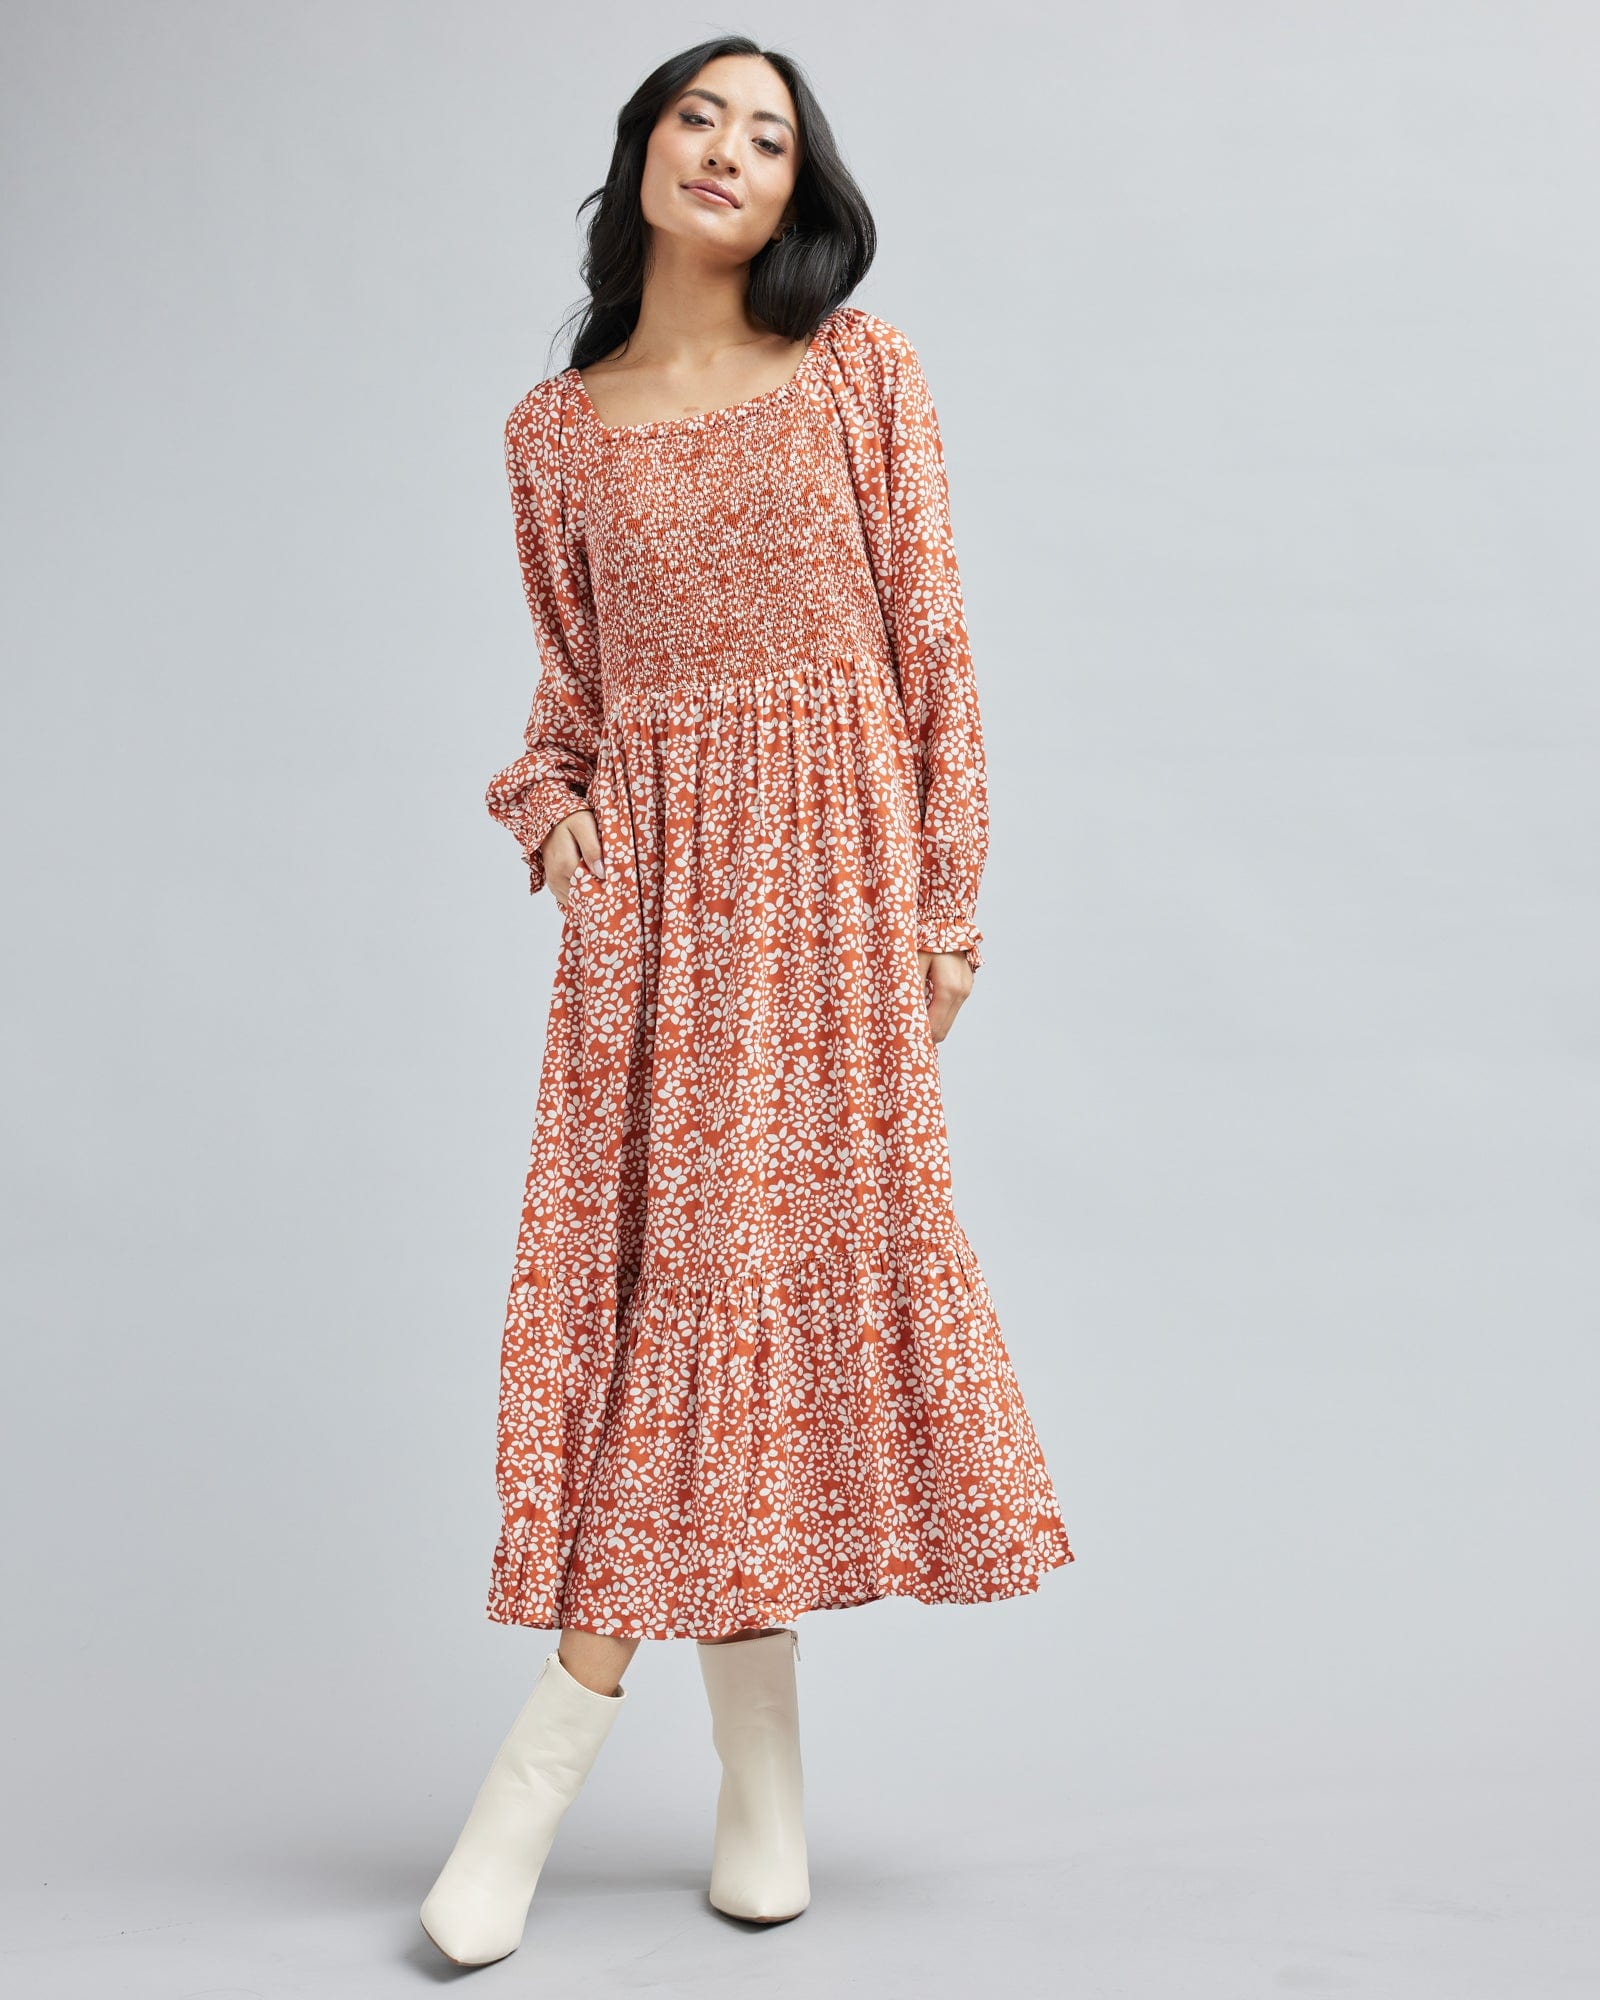 Woman in a long sleeve, midi-length, orange and white floral dress